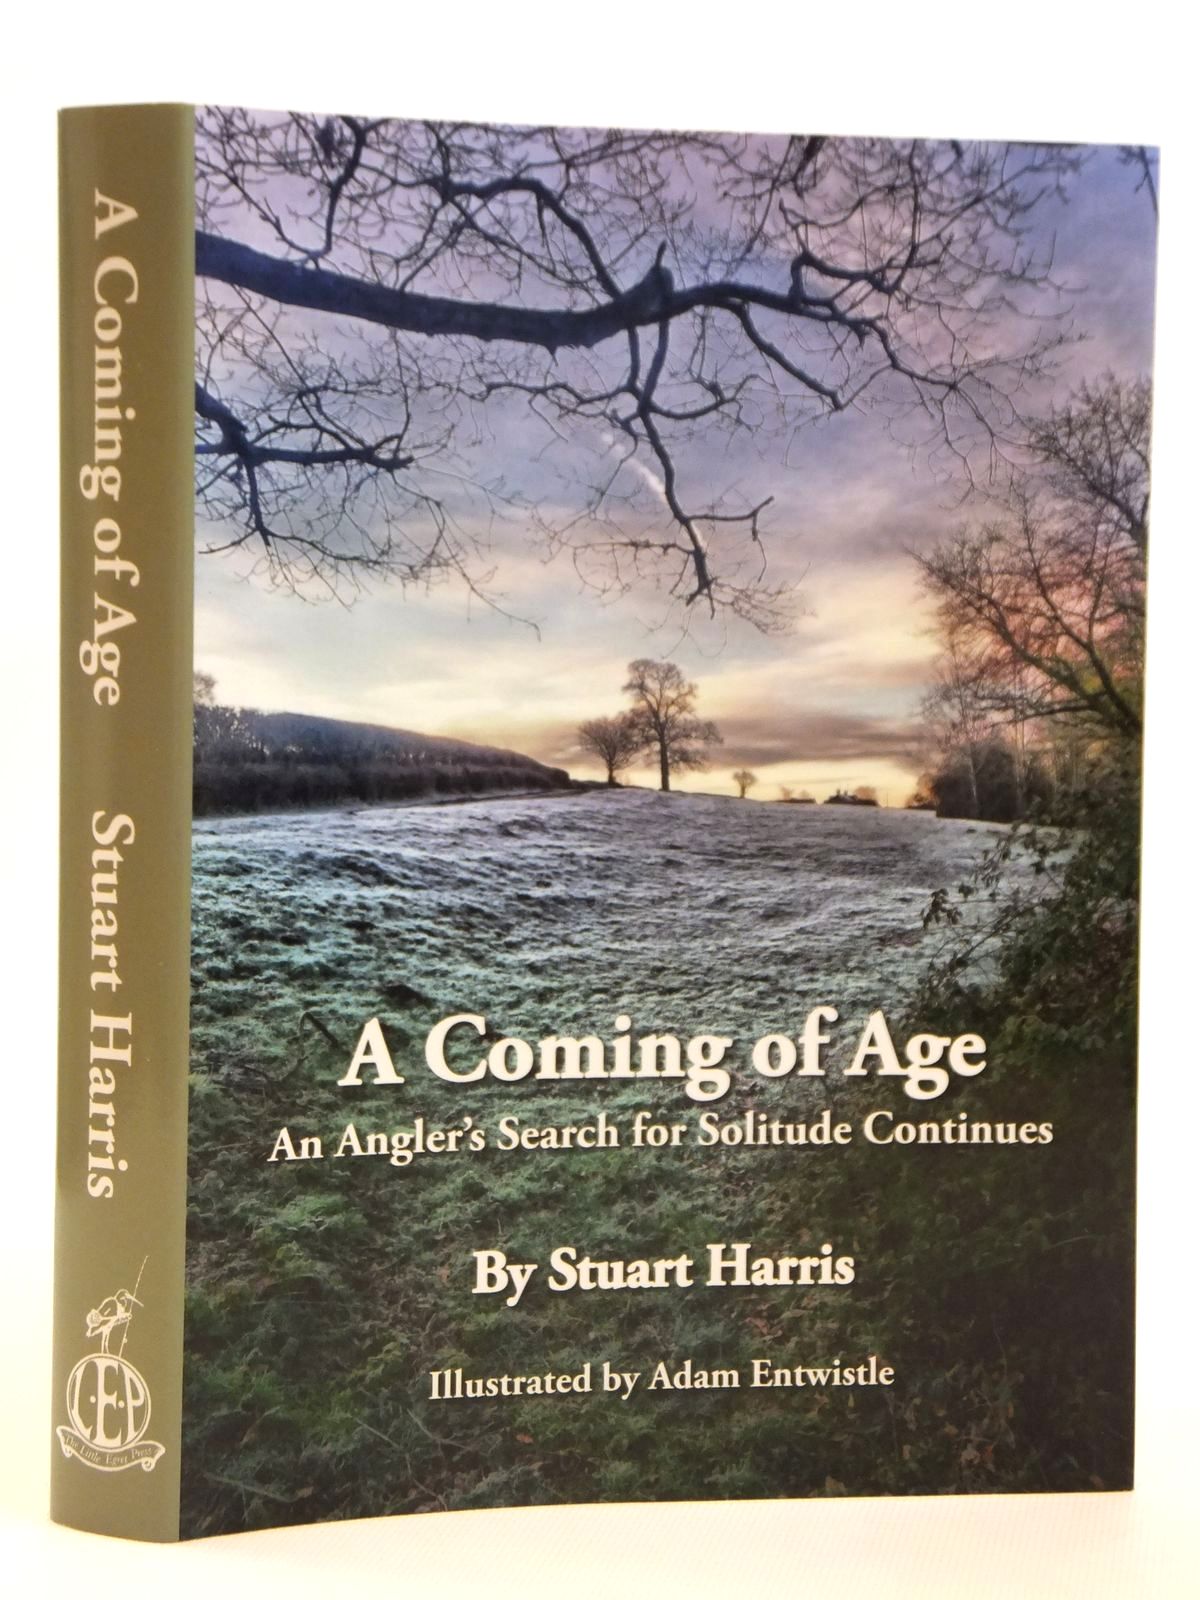 Photo of A COMING OF AGE AN ANGLER'S SEARCH FOR SOLITUDE CONTINUES written by Harris, Stuart illustrated by Entwistle, Adam published by The Little Egret Press (STOCK CODE: 2121616)  for sale by Stella & Rose's Books